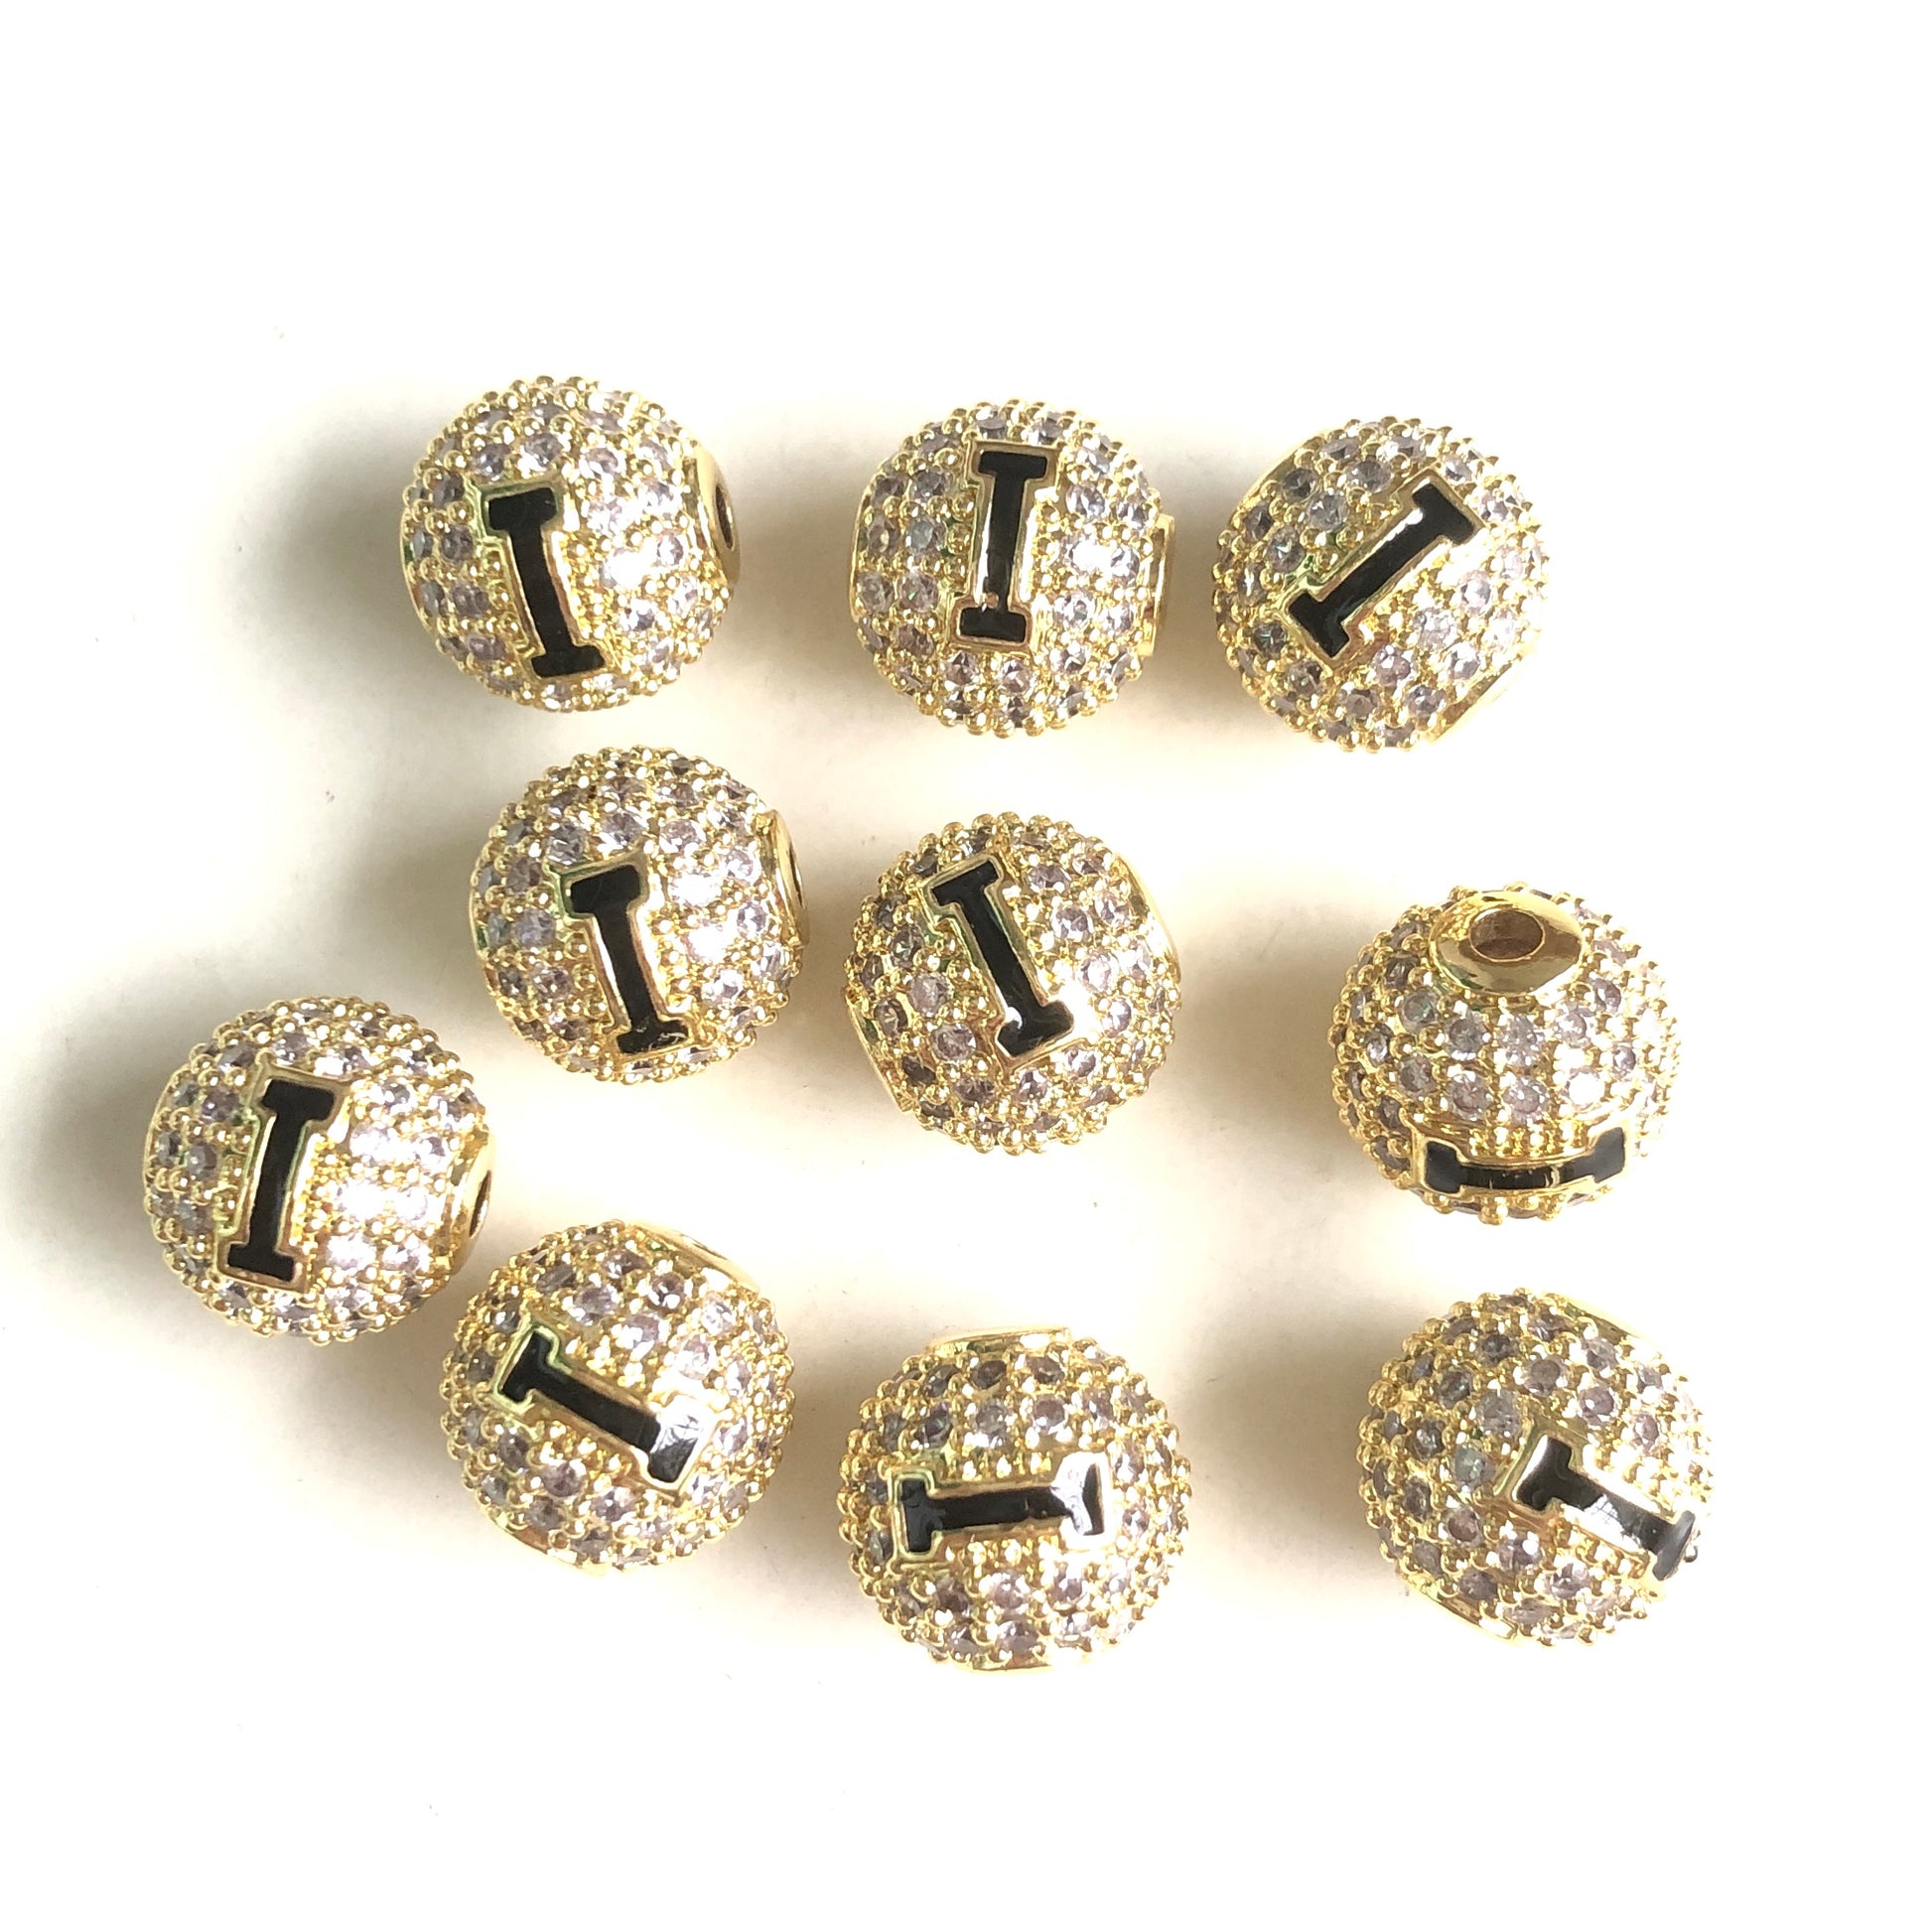 10-20pcs/lot 10mm Enamel Print CZ Paved "I" Initial Alphabet Letter Ball Spacers Beads Gold CZ Paved Spacers 10mm Beads Ball Beads New Spacers Arrivals Charms Beads Beyond